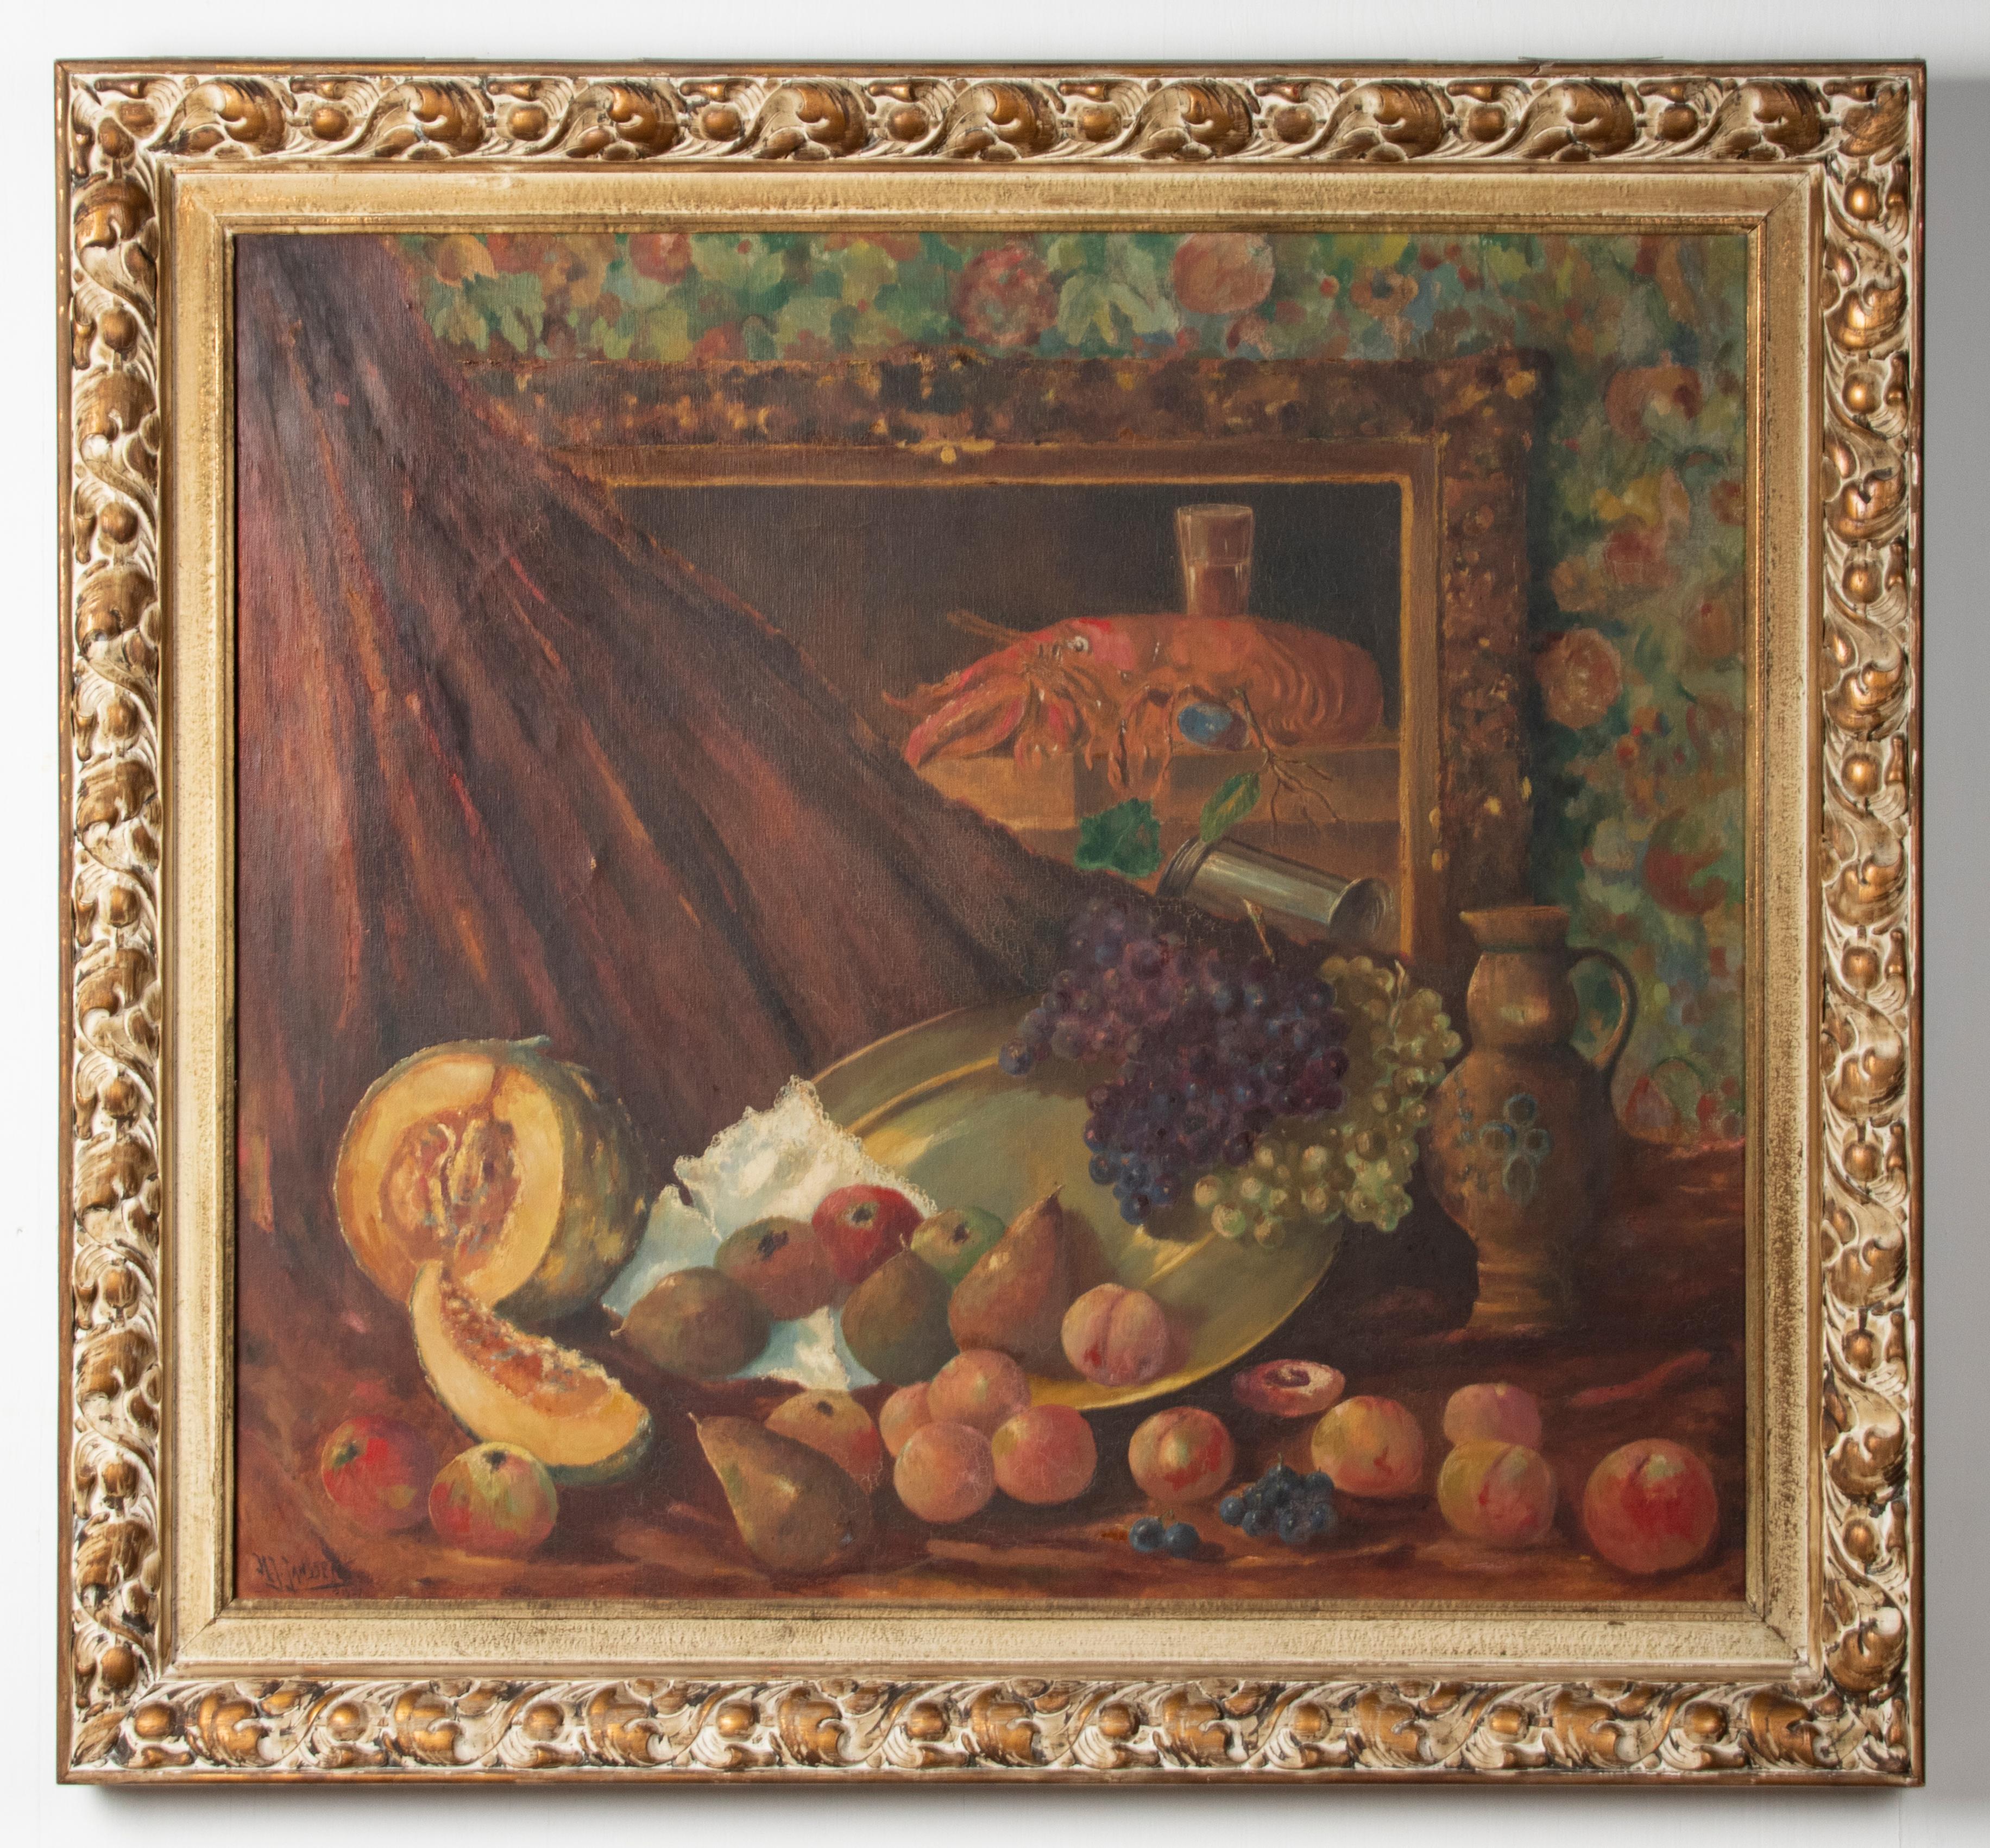 Very nice and large classic painting, a still life with many different fruits and a lobster. The lobster is depicted on a painting that falls within the scene of this painting. The painting is signed HJ Janssen and dated 1927. This is not a